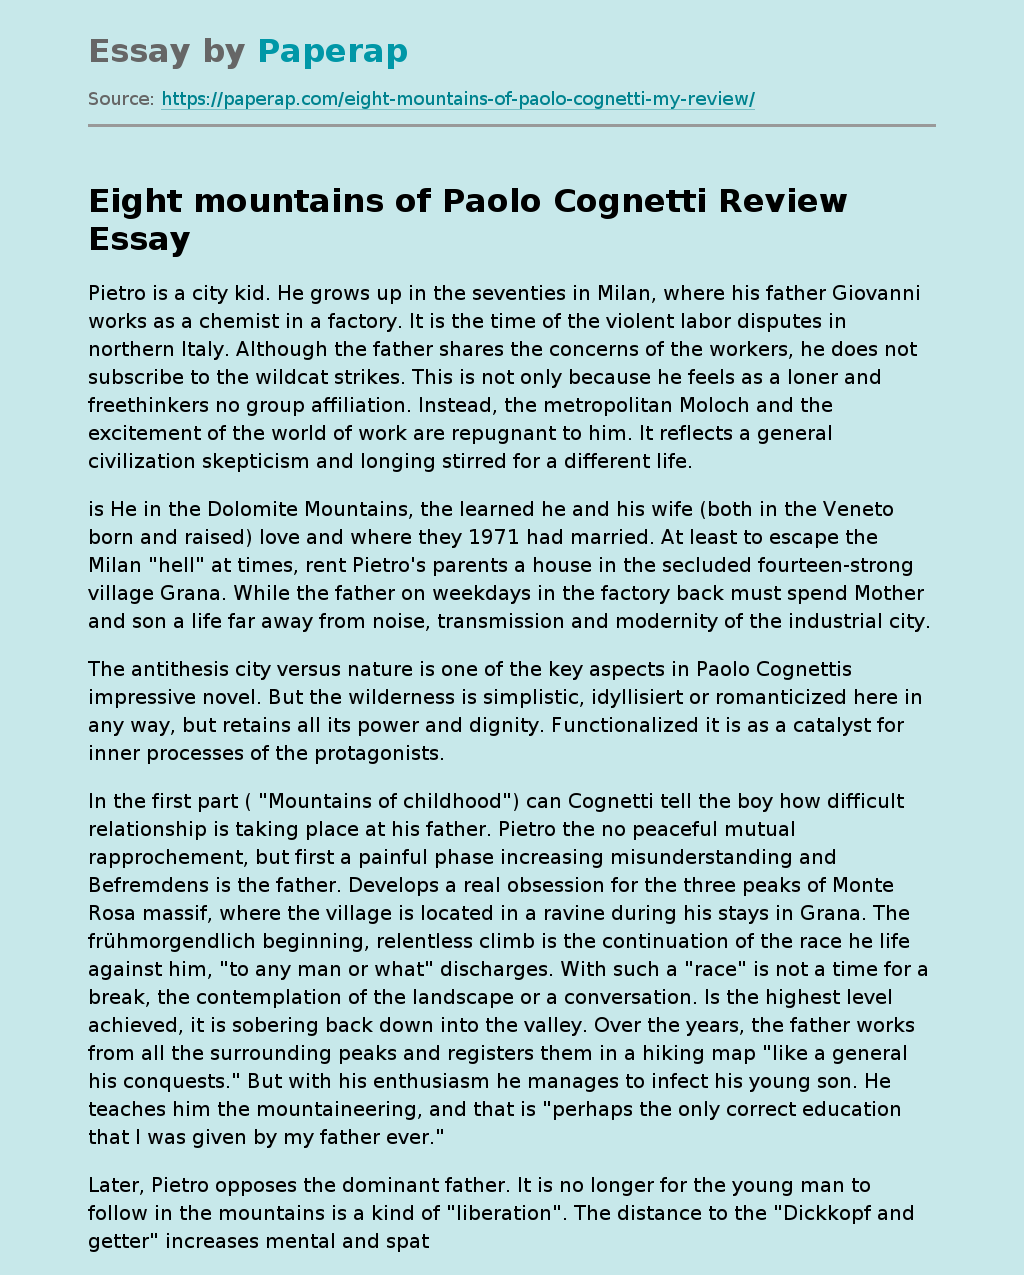 Eight mountains of Paolo Cognetti Review